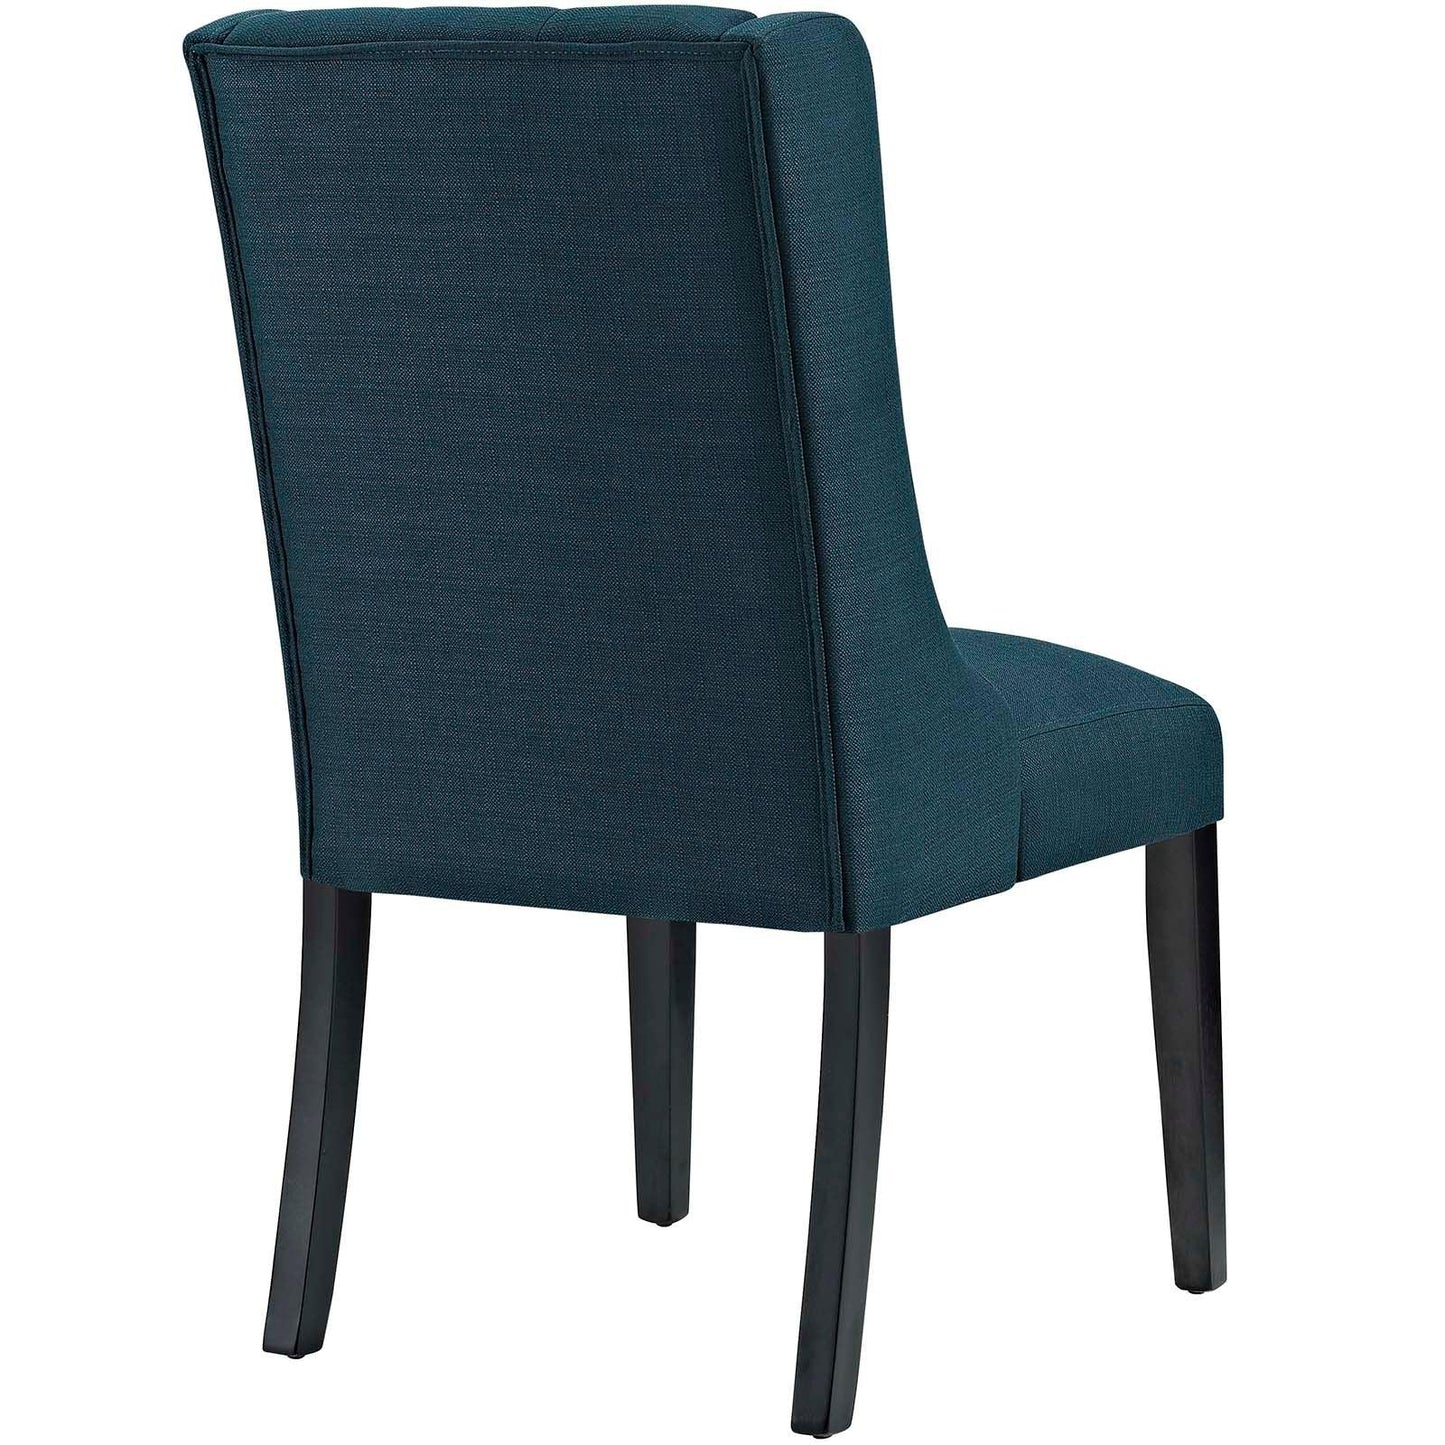 Modway Baronet Dining Chair Fabric Set of 4 FredCo